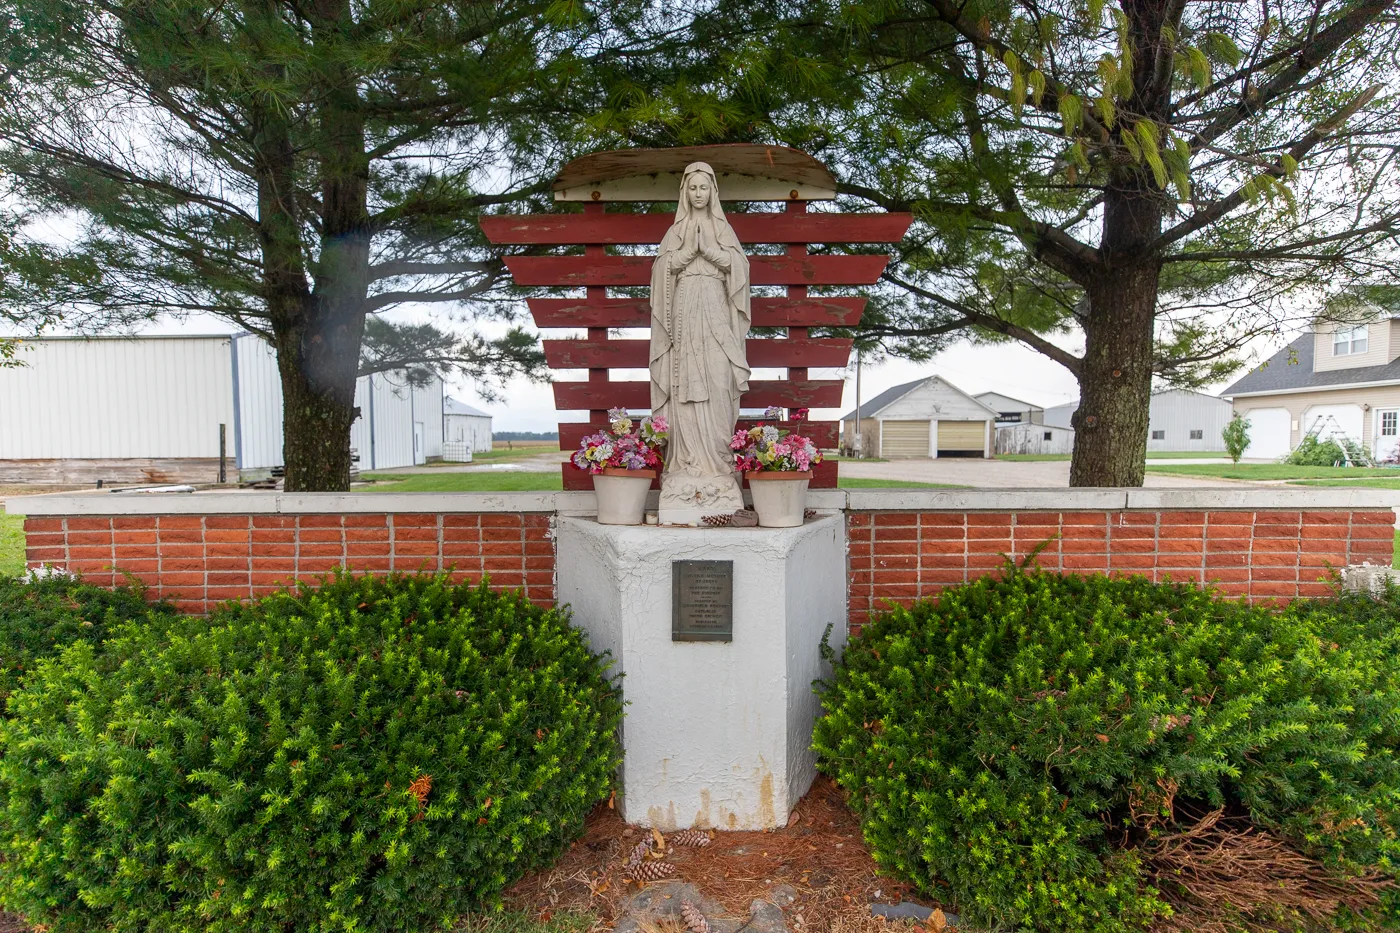 Our Lady of the Highway Shrine on Route 66 in Raymond, Illinois